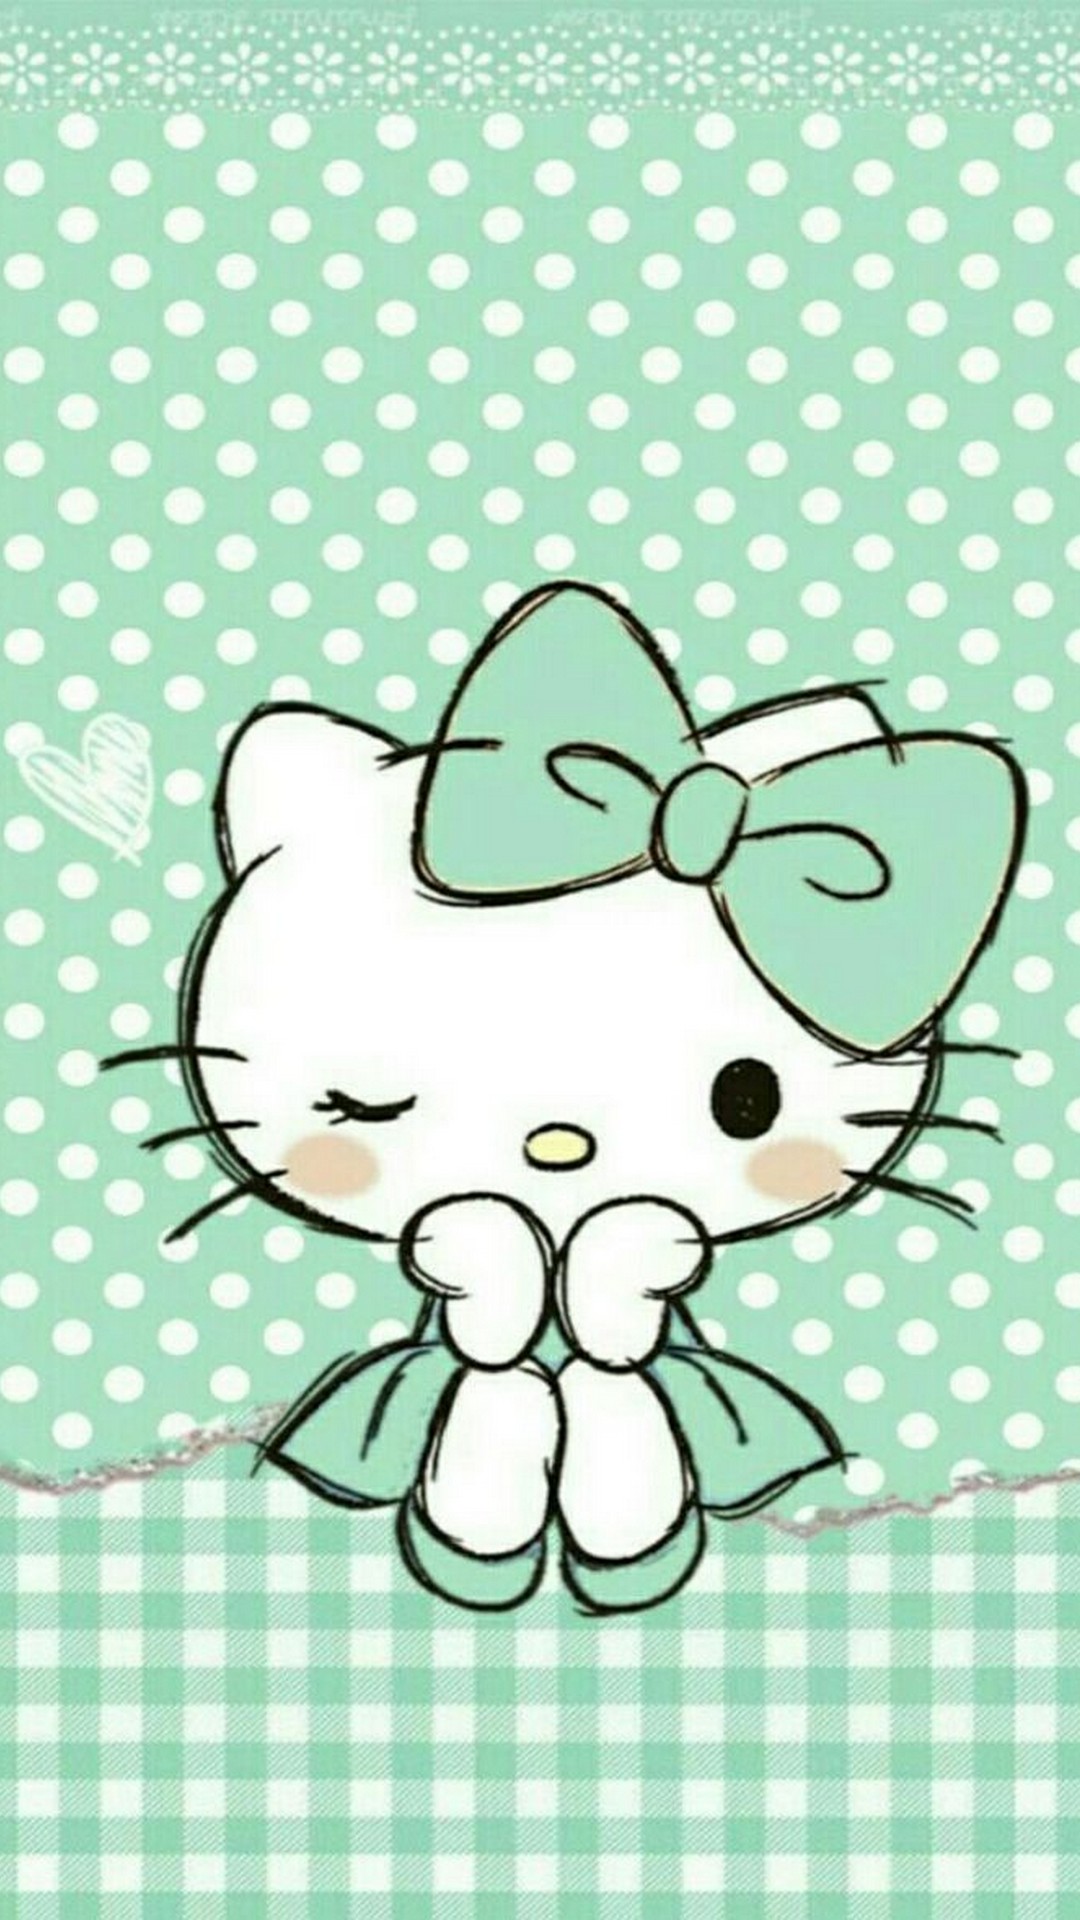 Hello Kitty Wallpaper For Android with resolution 1080X1920 pixel. You can make this wallpaper for your Android backgrounds, Tablet, Smartphones Screensavers and Mobile Phone Lock Screen